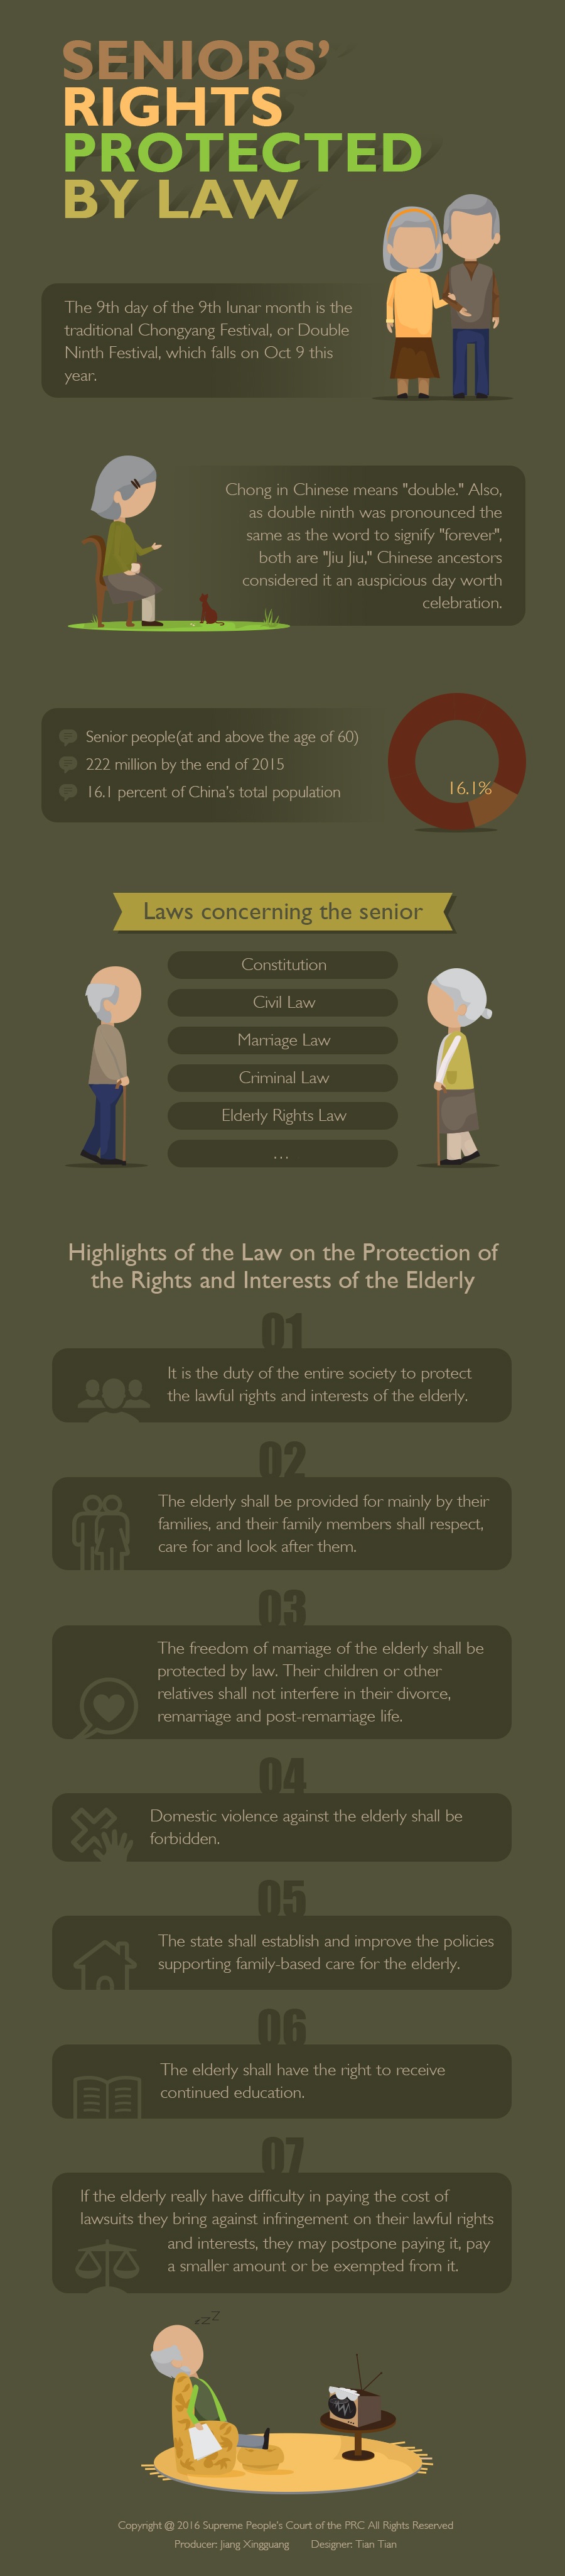 Seniors' rights protected by law